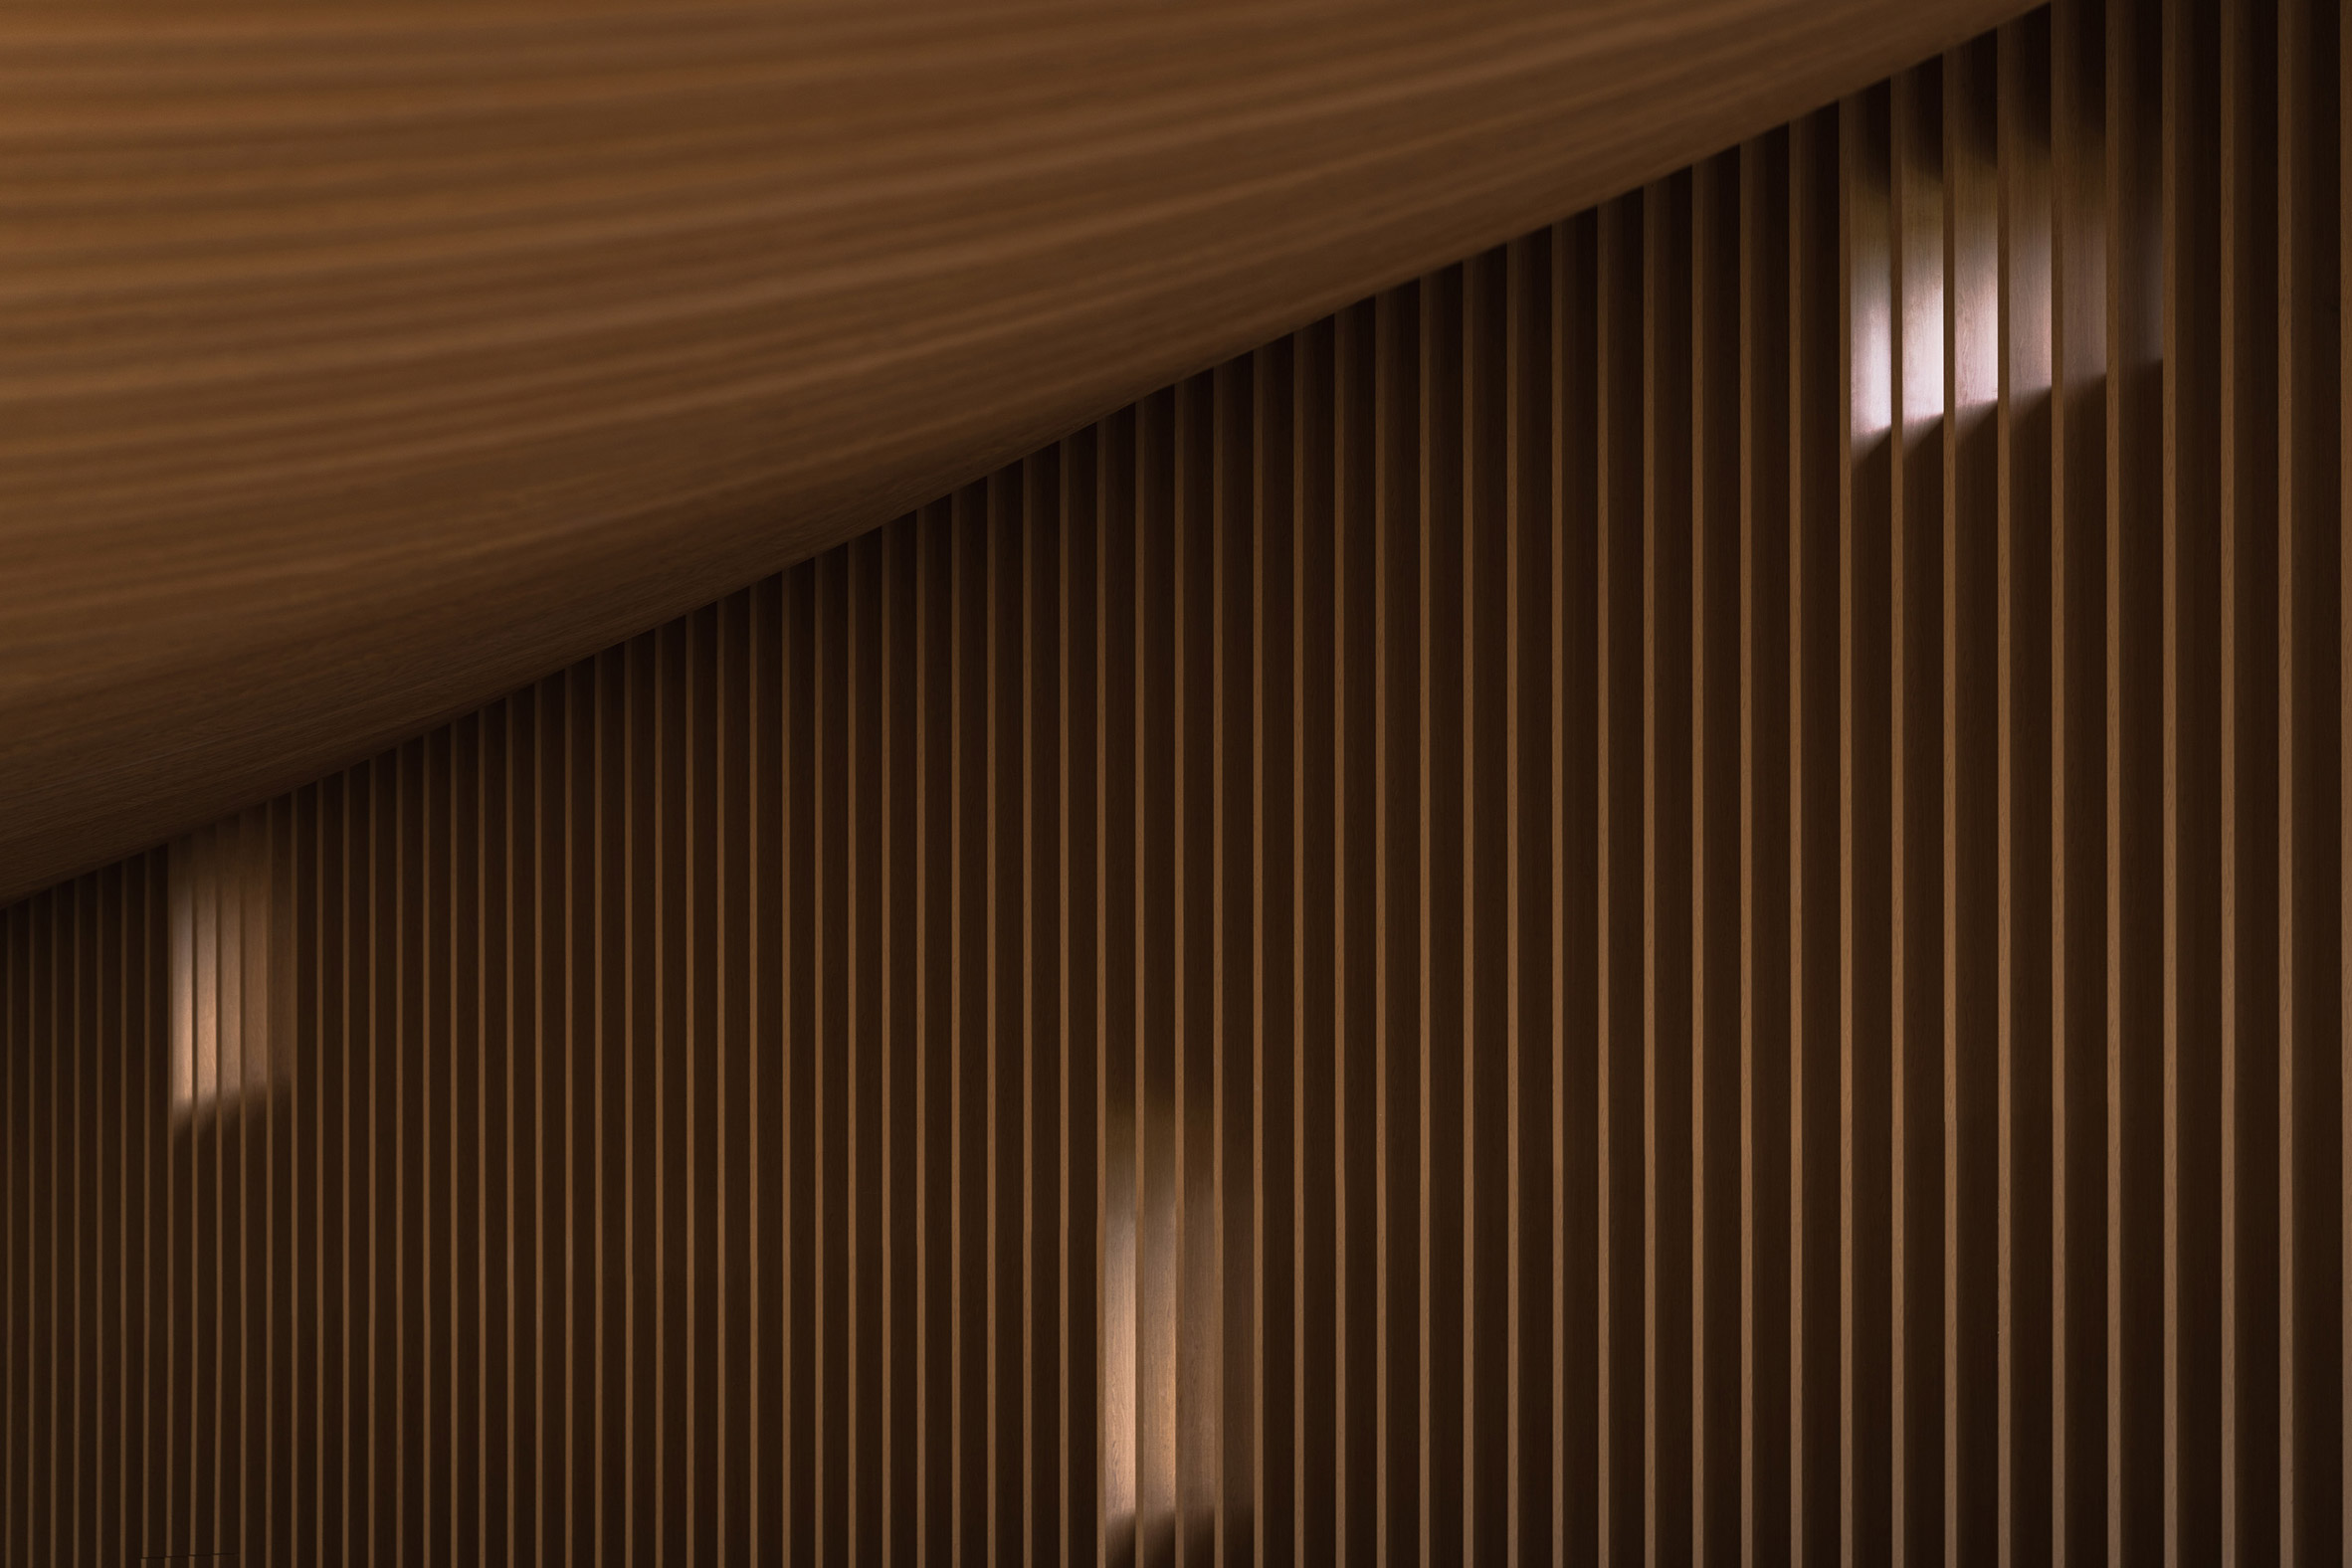 Image of light dappling across the wooden walls of the book shop